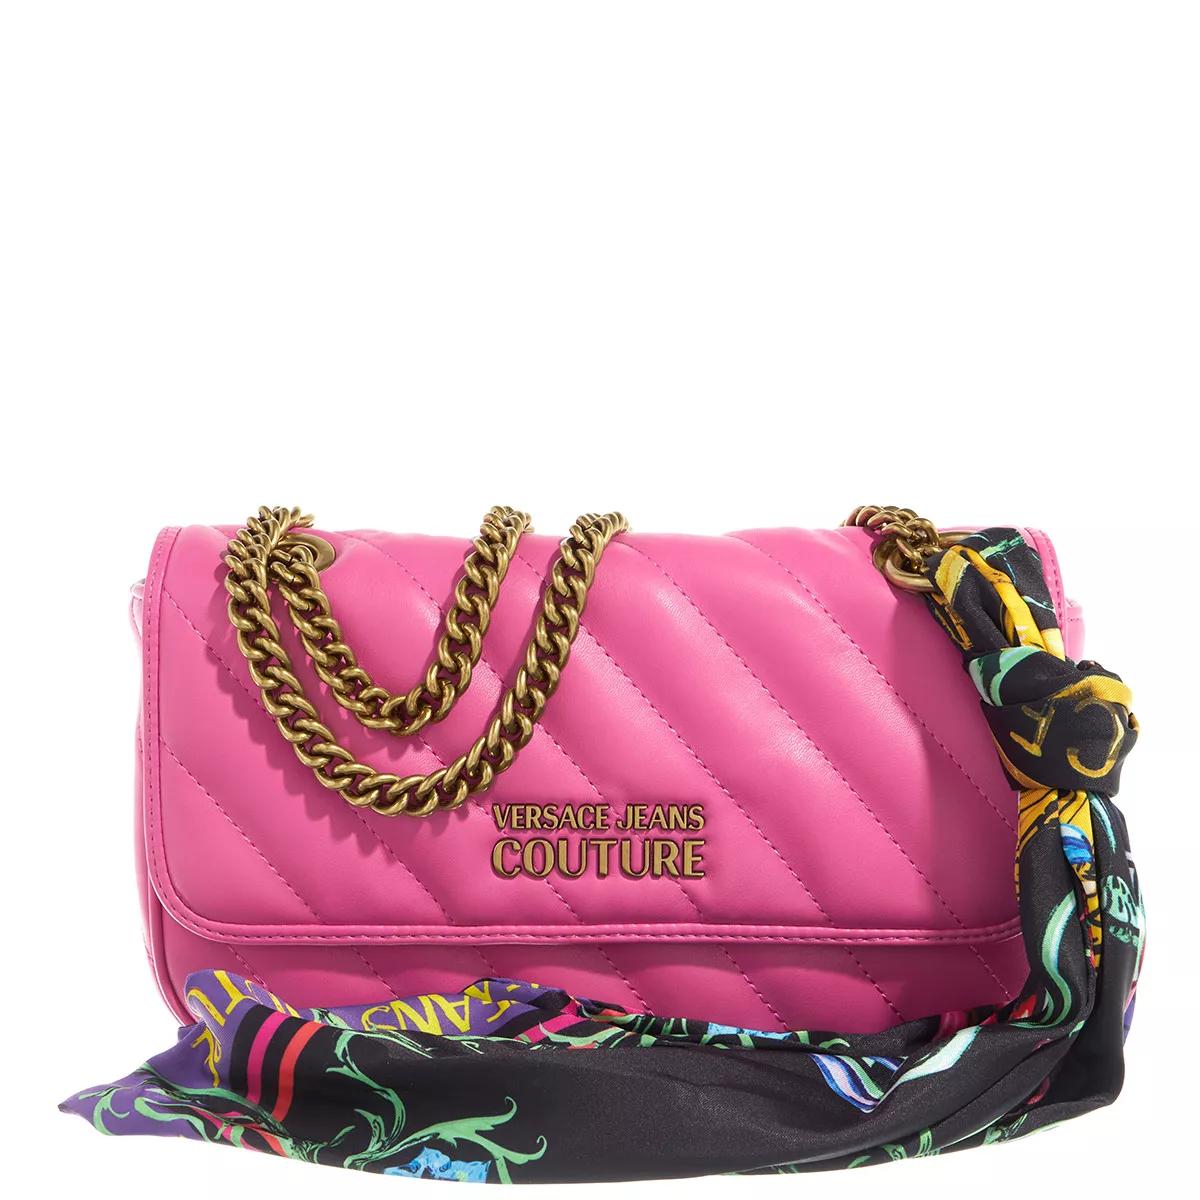 Versace Jeans Couture Range A - Thelma Soft Hot Pink, Crossbody Bag